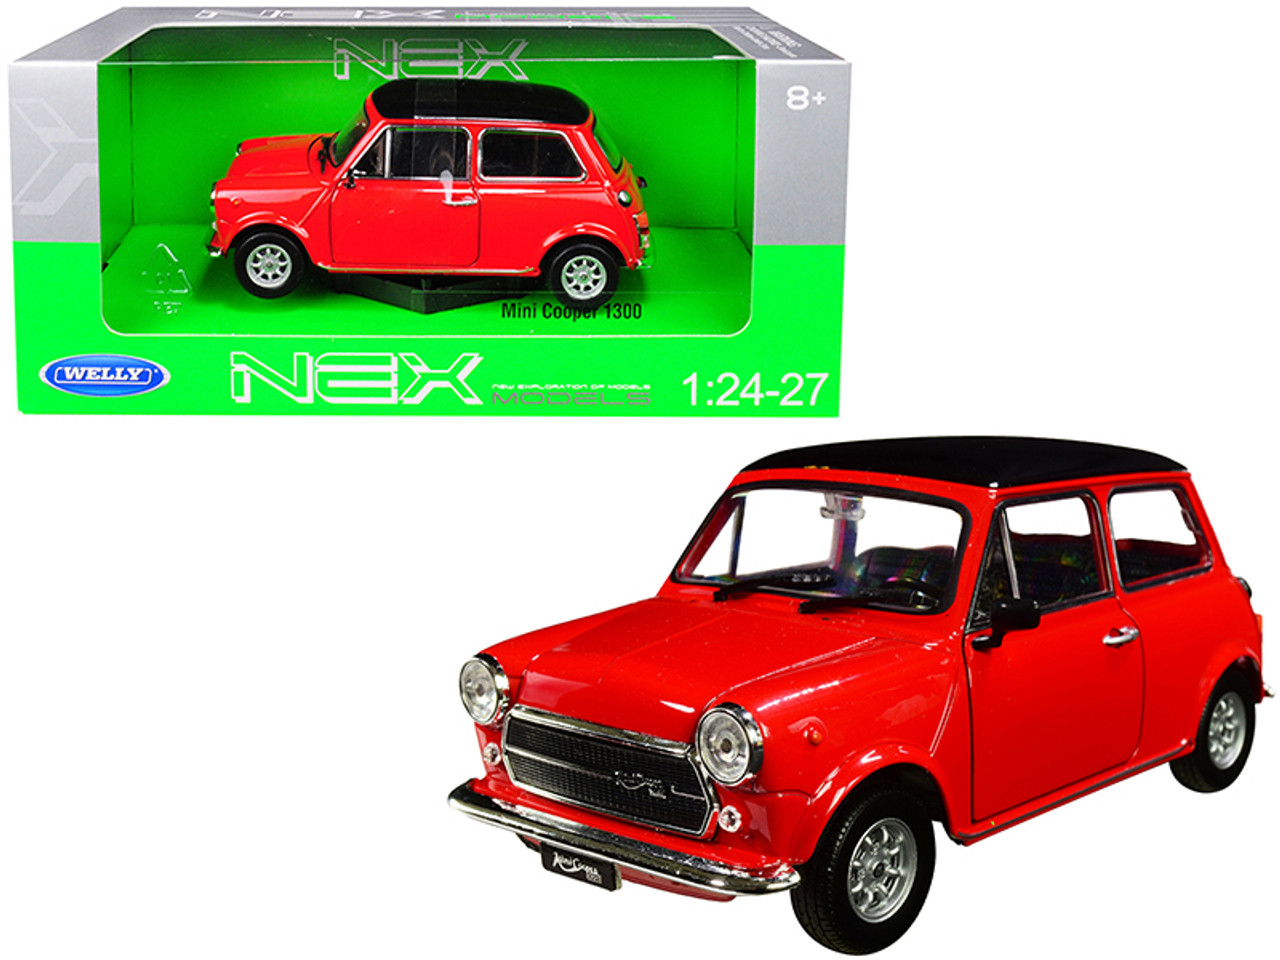 Mini Cooper 1300 Red with Black Top 1/24-1/27 Diecast Model Car by Welly